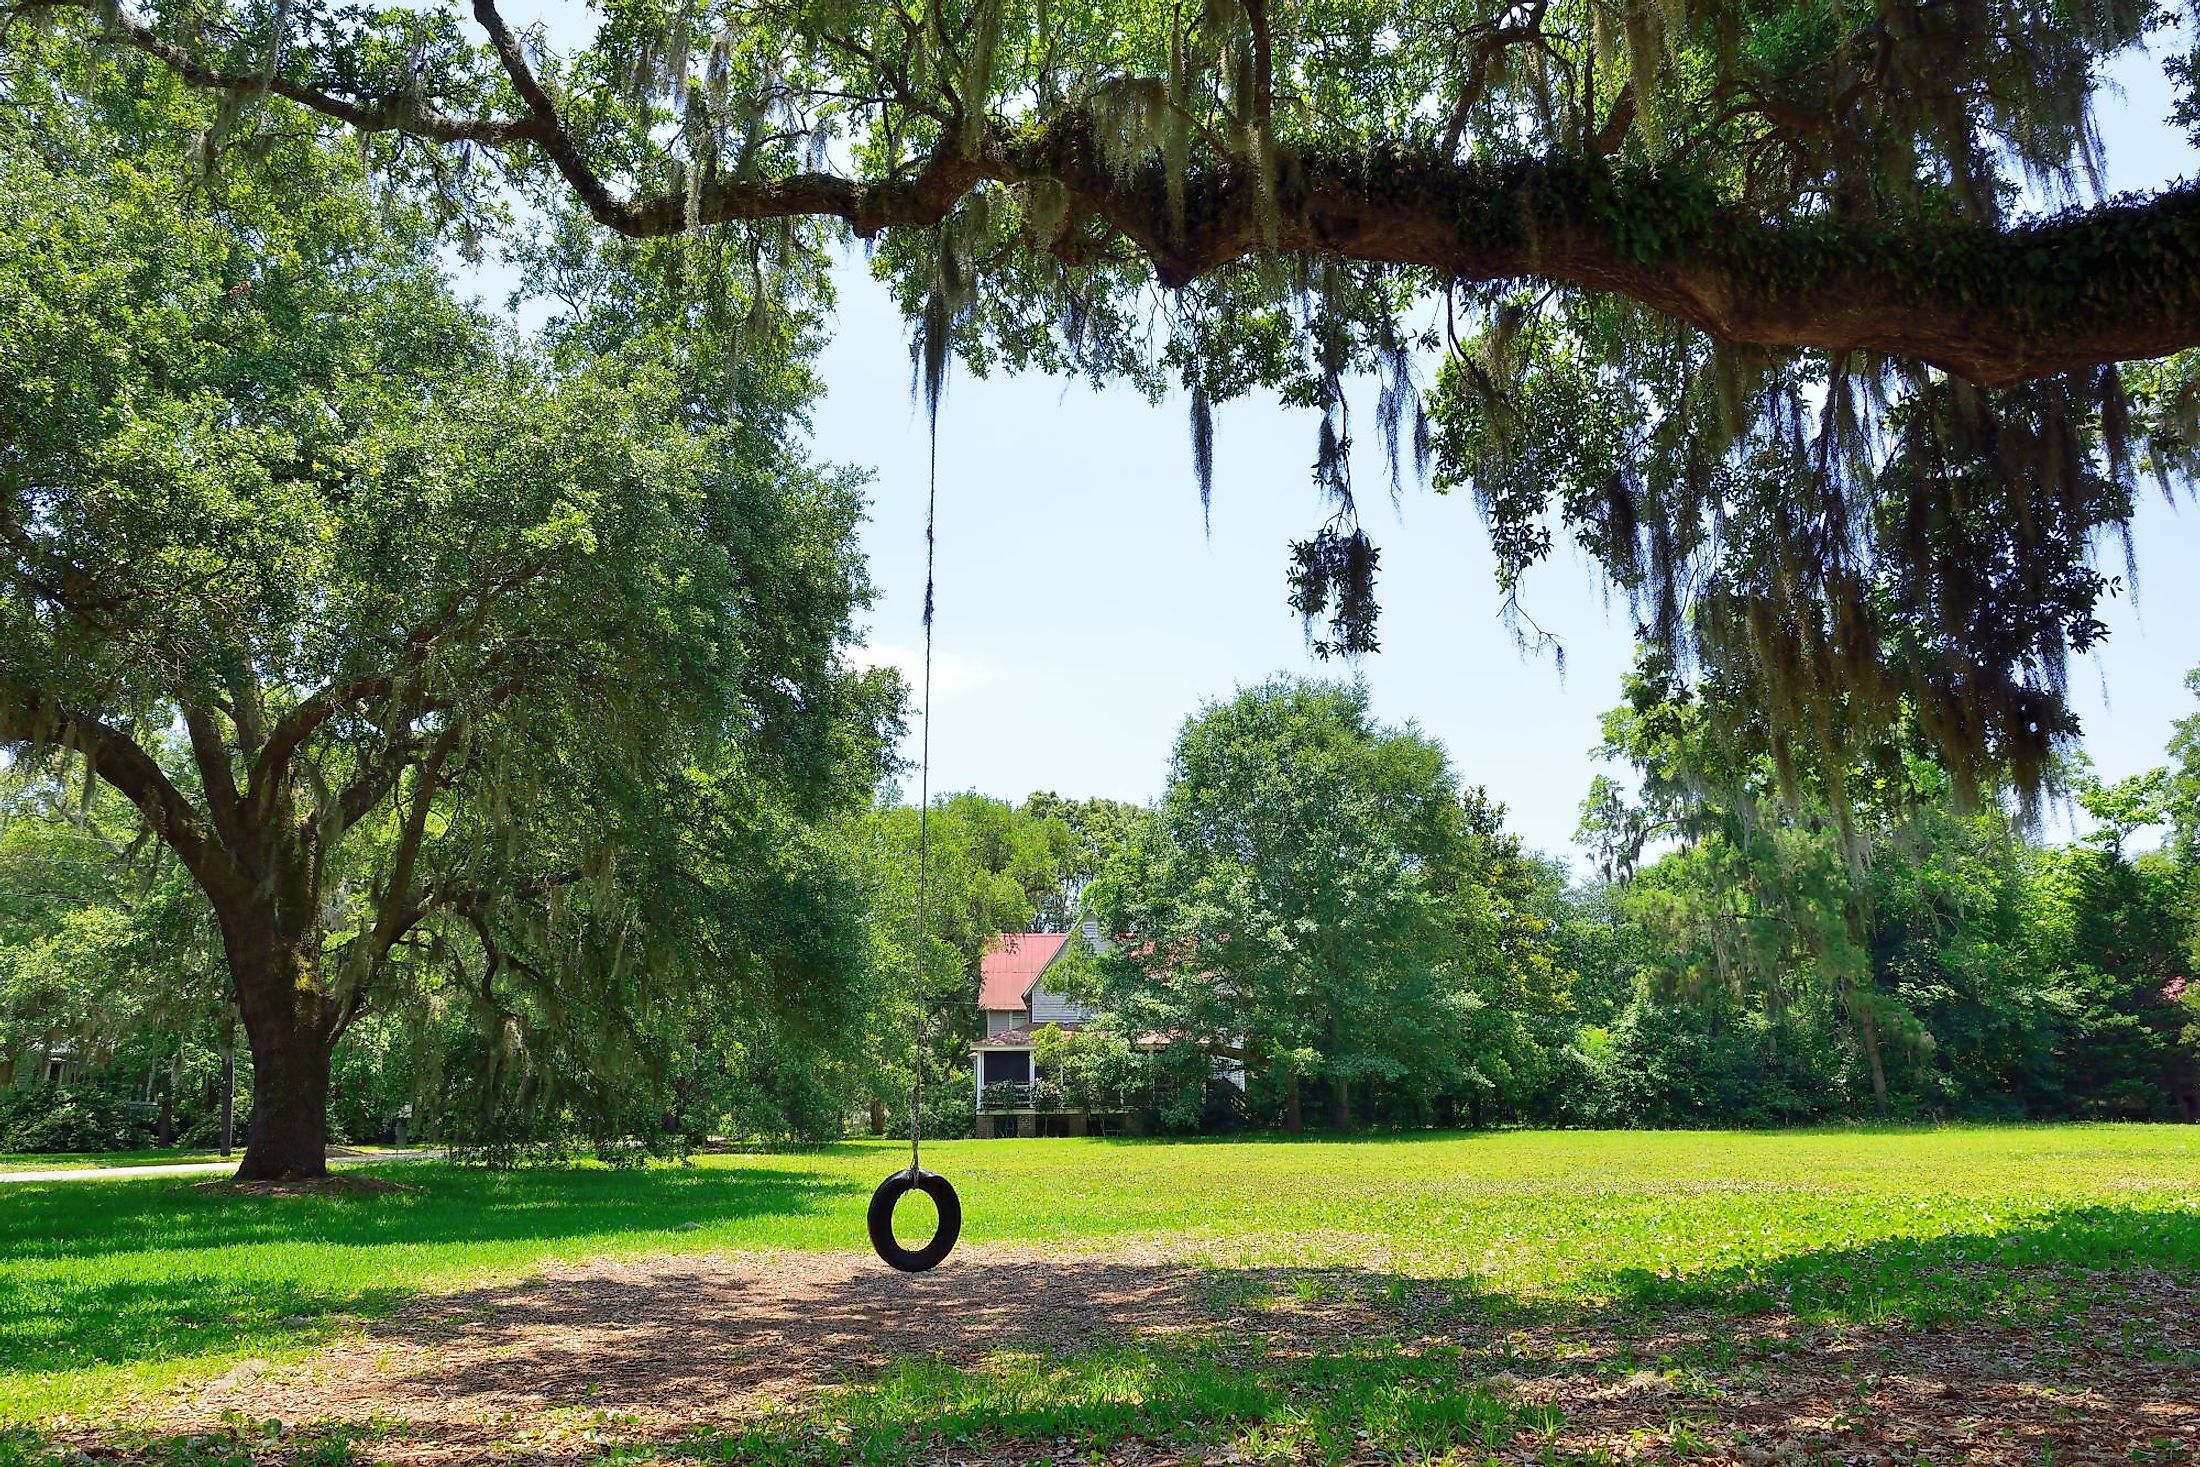 Tire swings and Spanish moss dangling from oak trees in McClellanville, South Carolina. Editorial credit: Scott Woodham Photography / Shutterstock.com